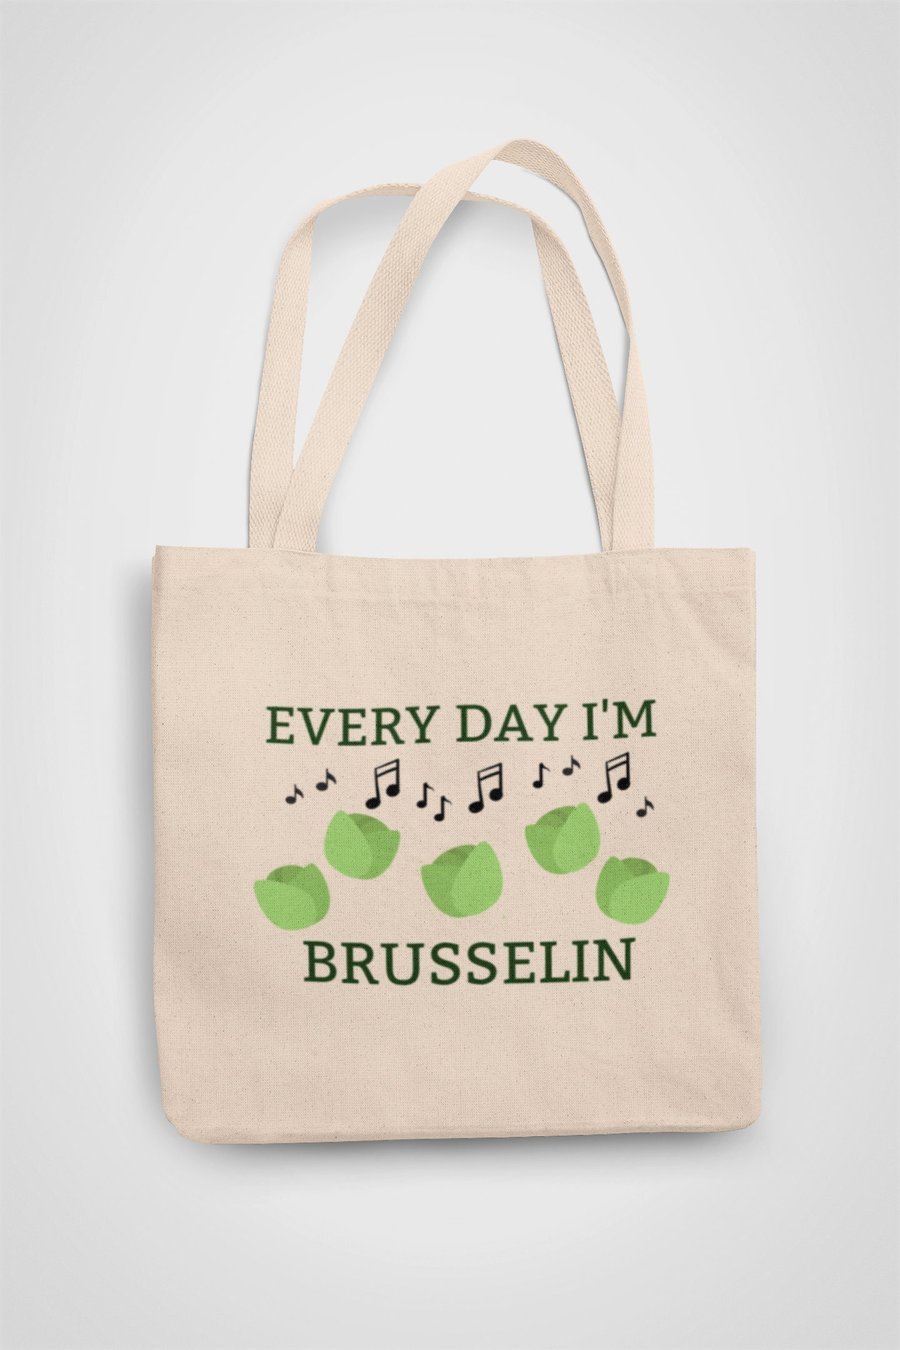 Everyday im Brusselin Novelty Tote Bag Reusable Cotton bag - funny gift